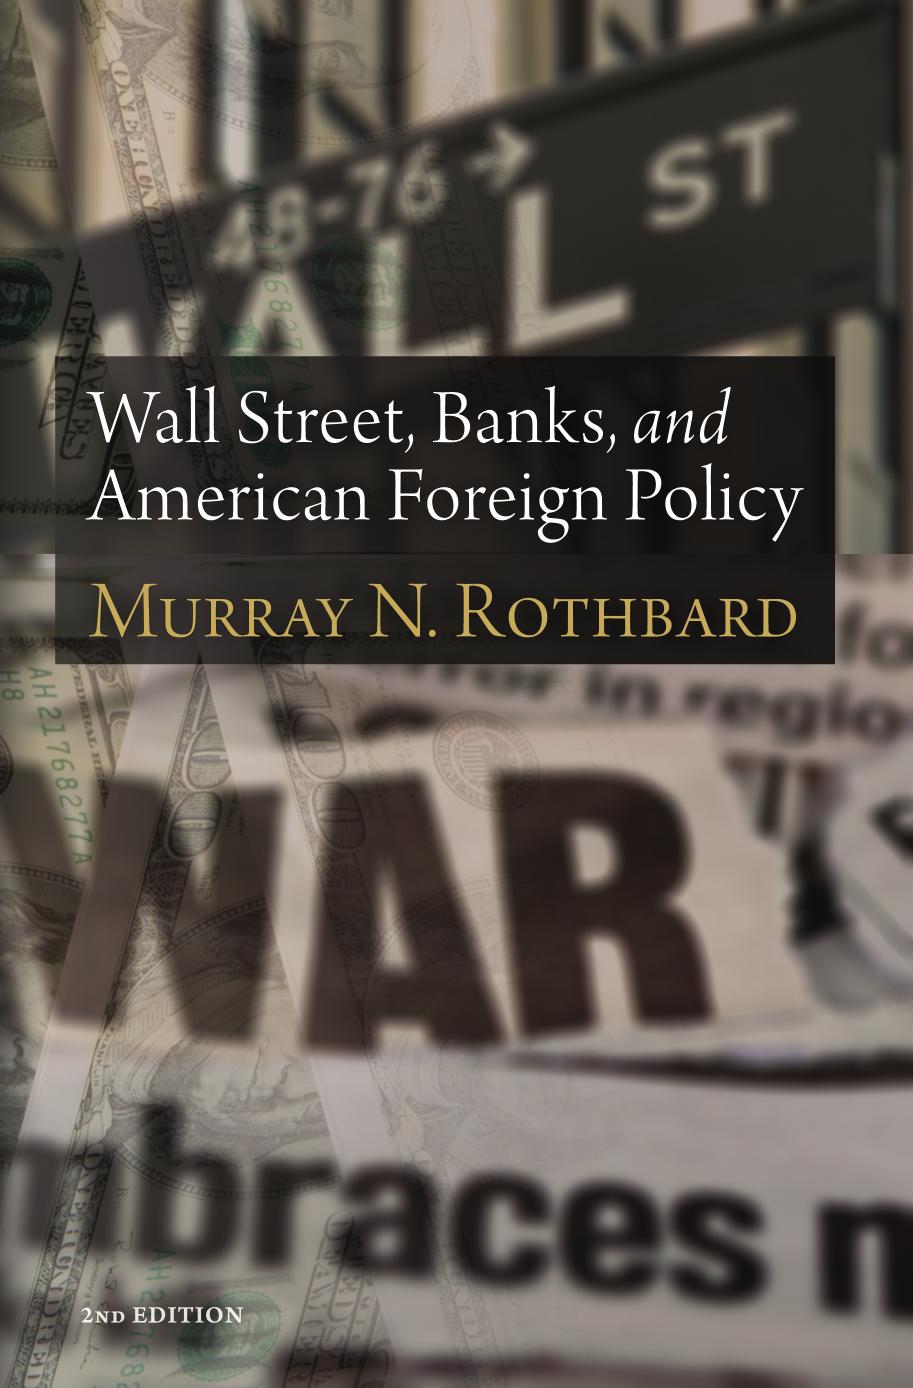 Wall Street, Banks, and American Foreign Policy - 2nd. Edition